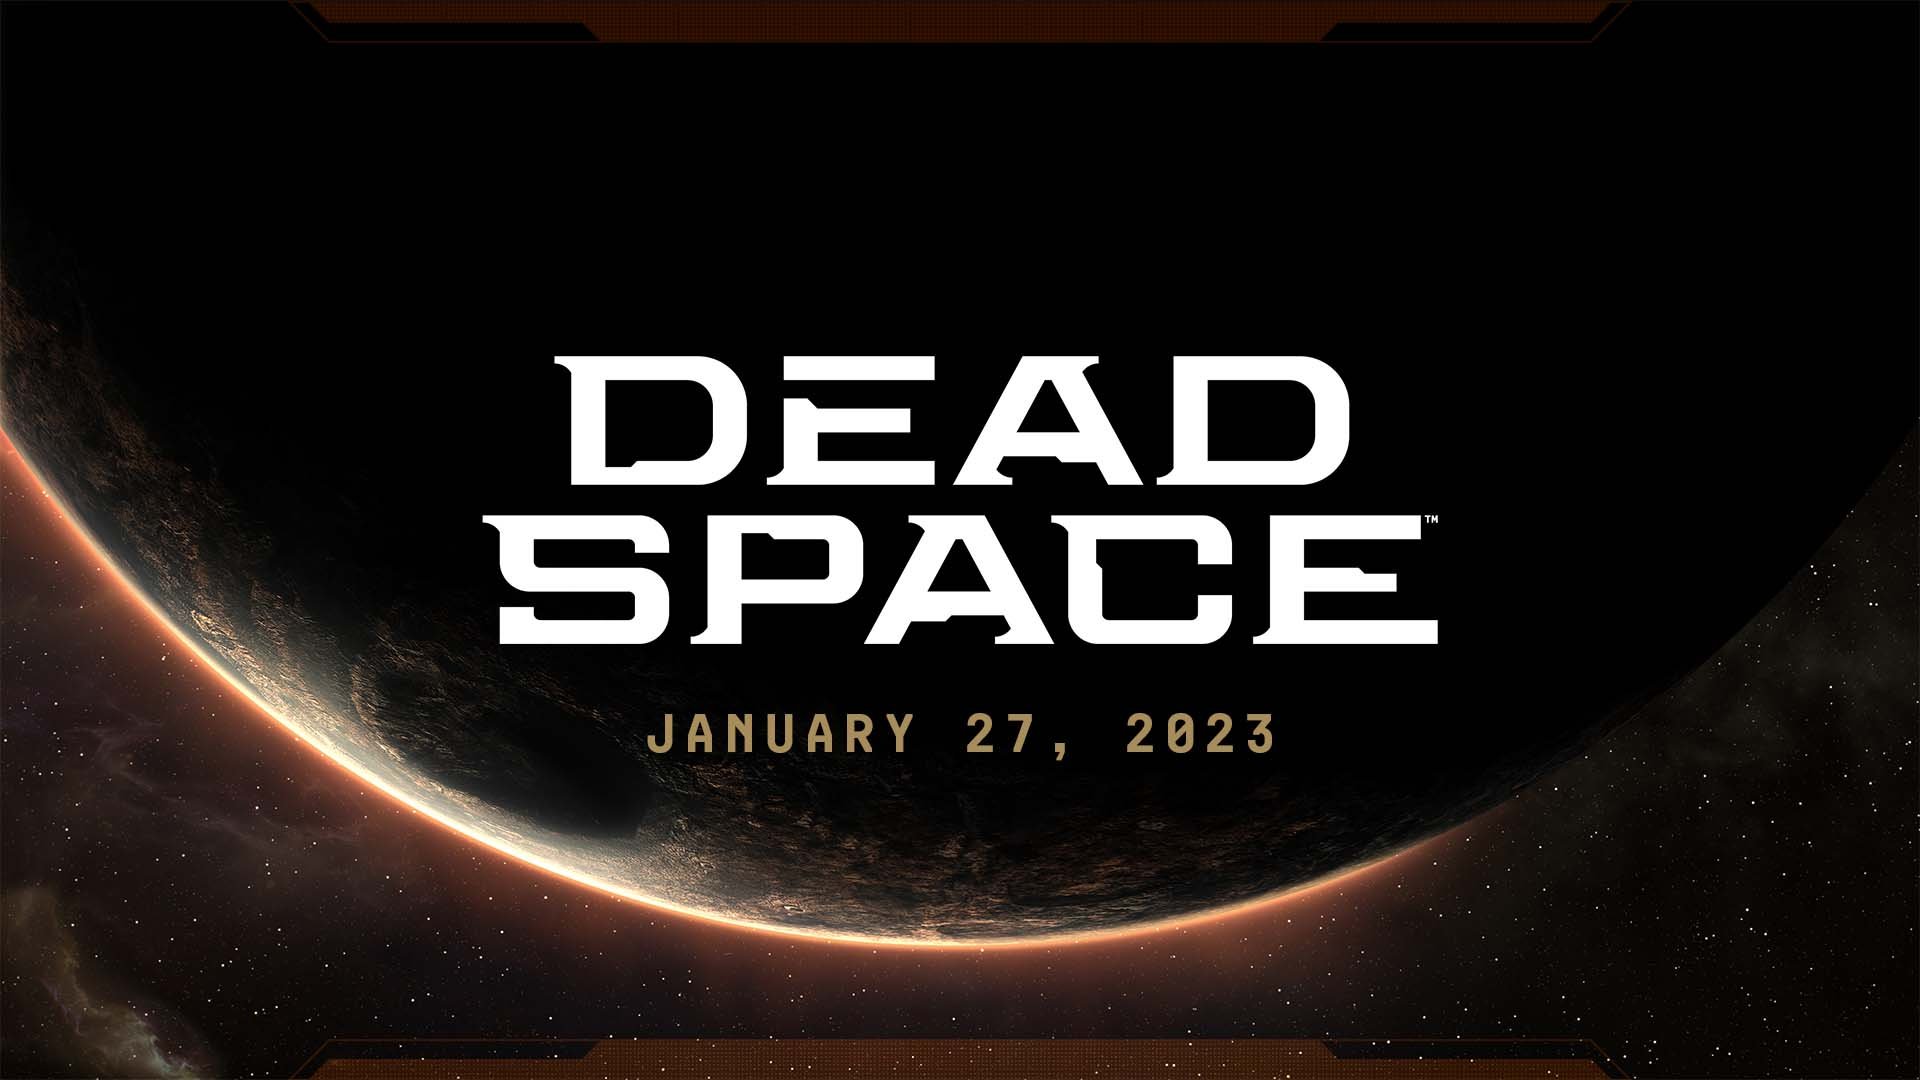 #
      Dead Space remake launches January 27, 2023